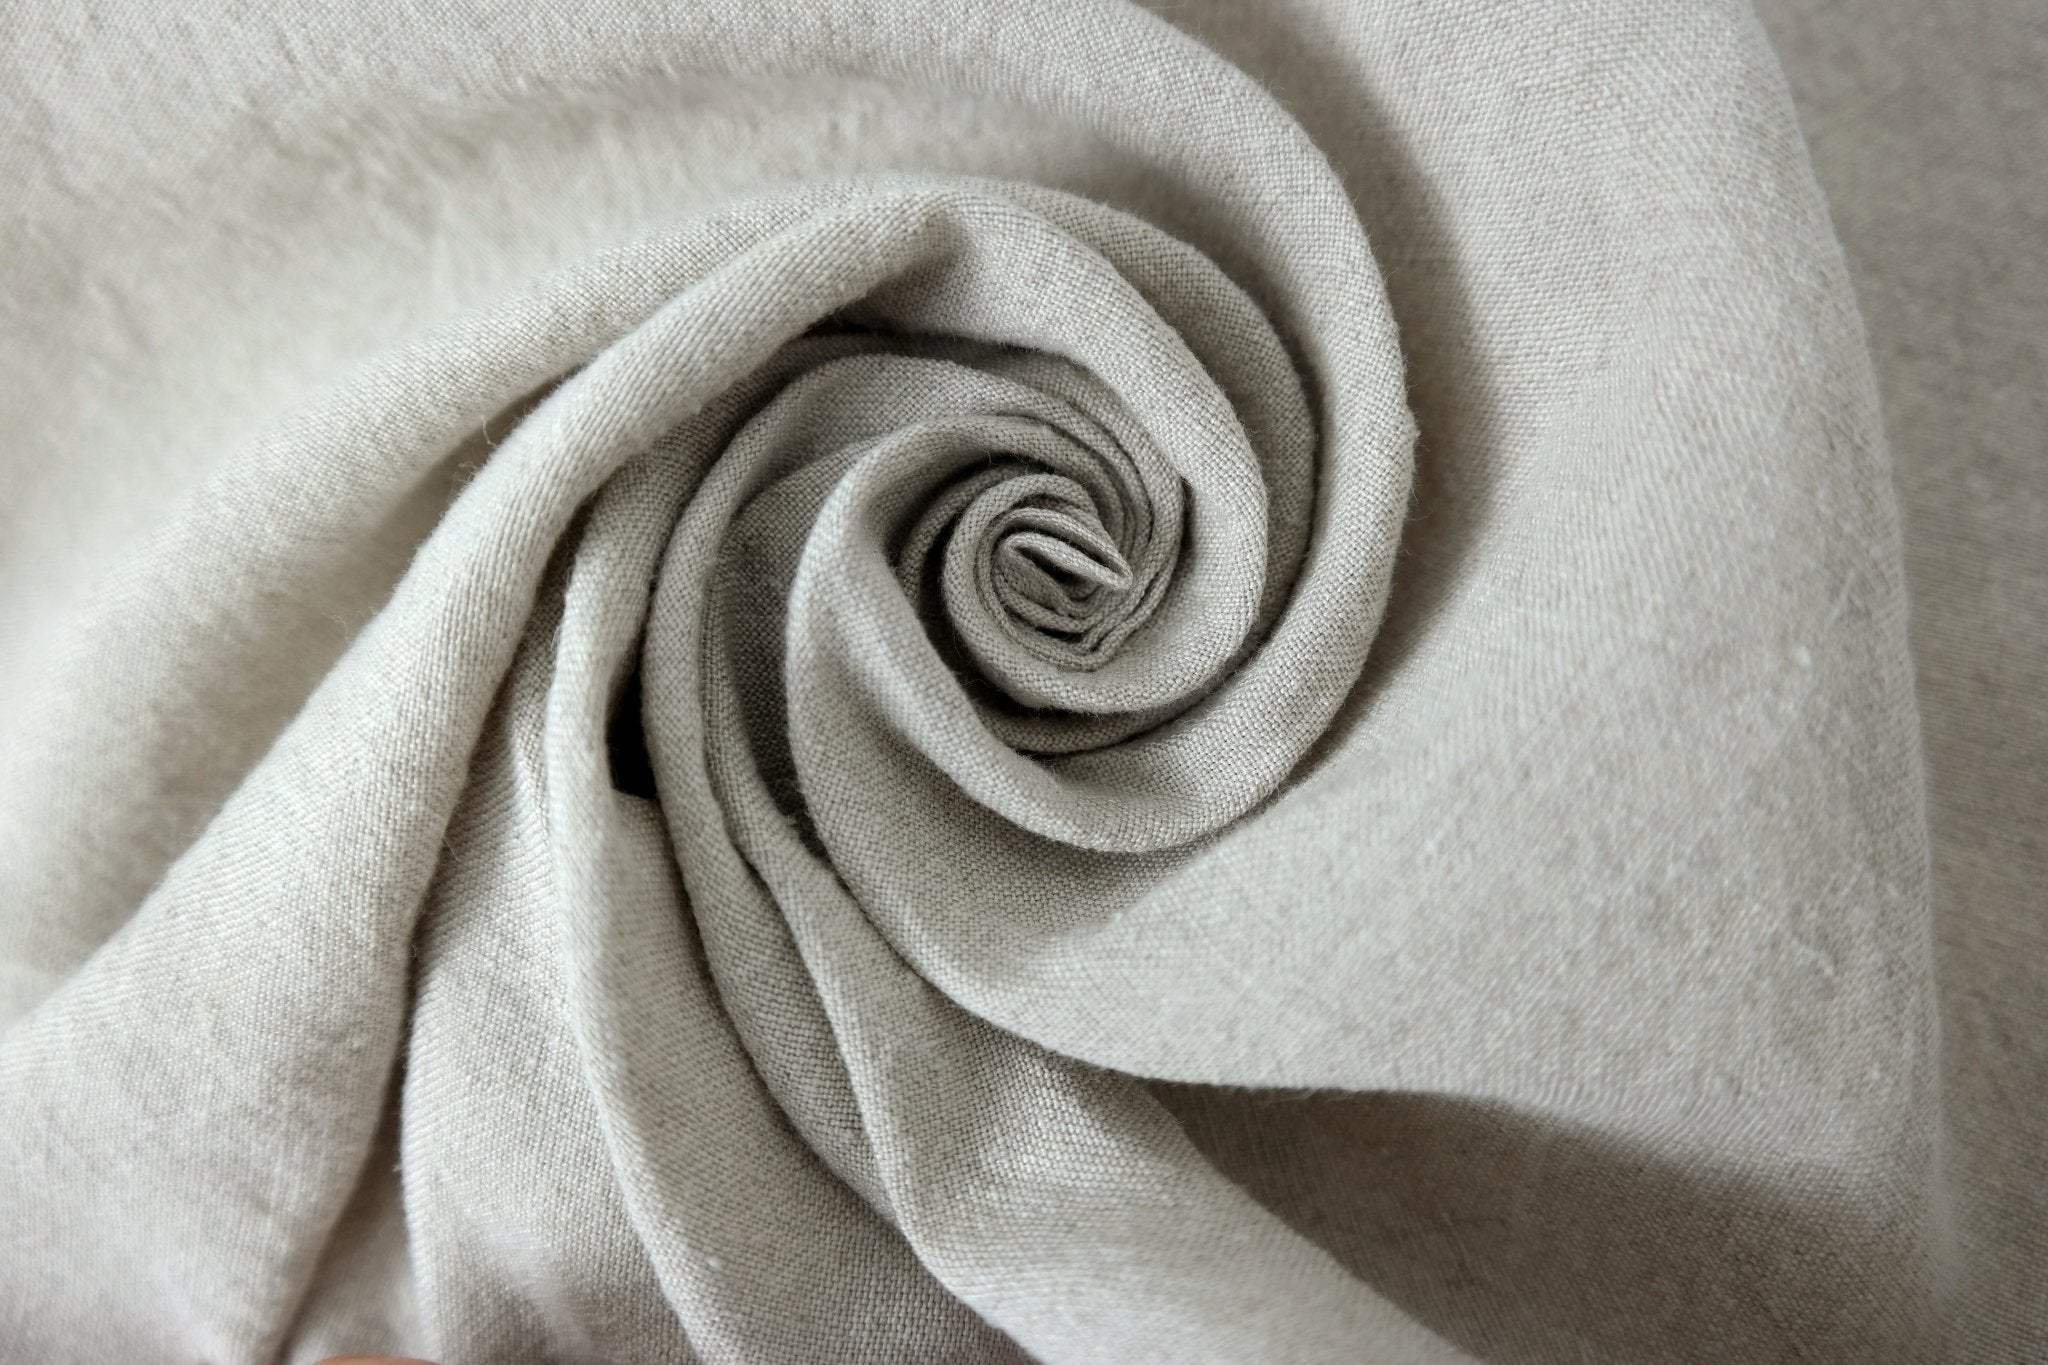 High Twisted 100% Linen Fabric Medium Weight 14S 6220 6600 6366 7369 - The Linen Lab - Natural 6366